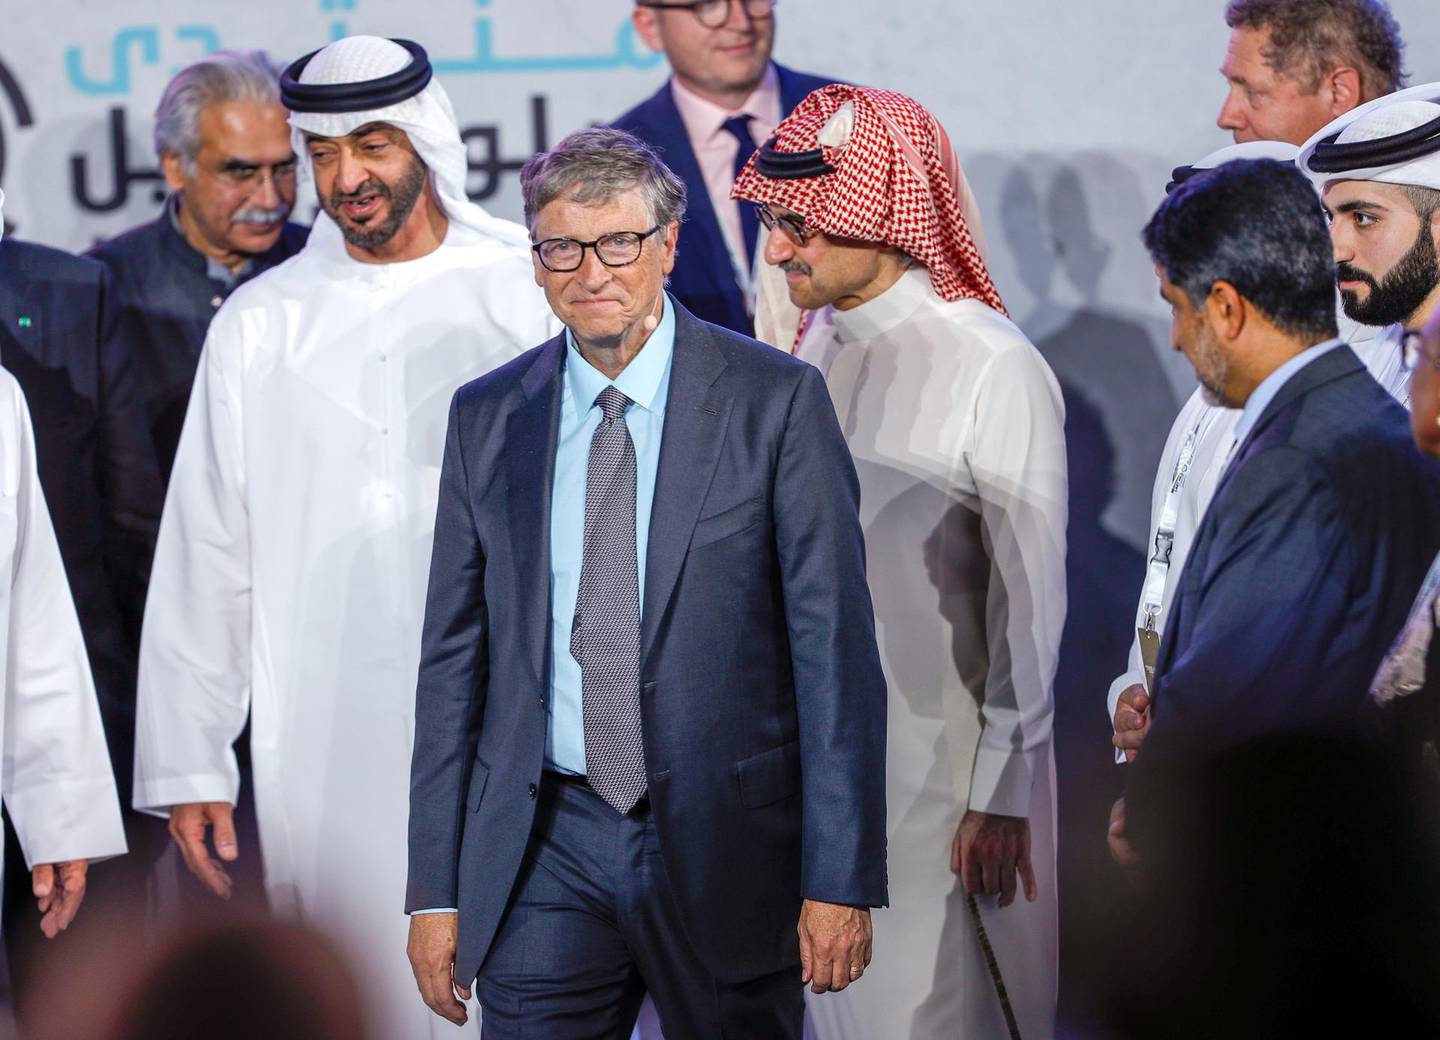 Abu Dhabi, United Arab Emirates, November 19 , 2019.  
Reaching the Last Mile Forum.
--Bill Gates and H.E. Sheikh Mohamed bin Zayed, Crown Prince of Abu Dhabi and Deputy Supreme Commander of the UAE Armed Forces leave the forum after the awards.
Victor Besa / The National
Section:  NA
Reporter:  Dan Sanderson